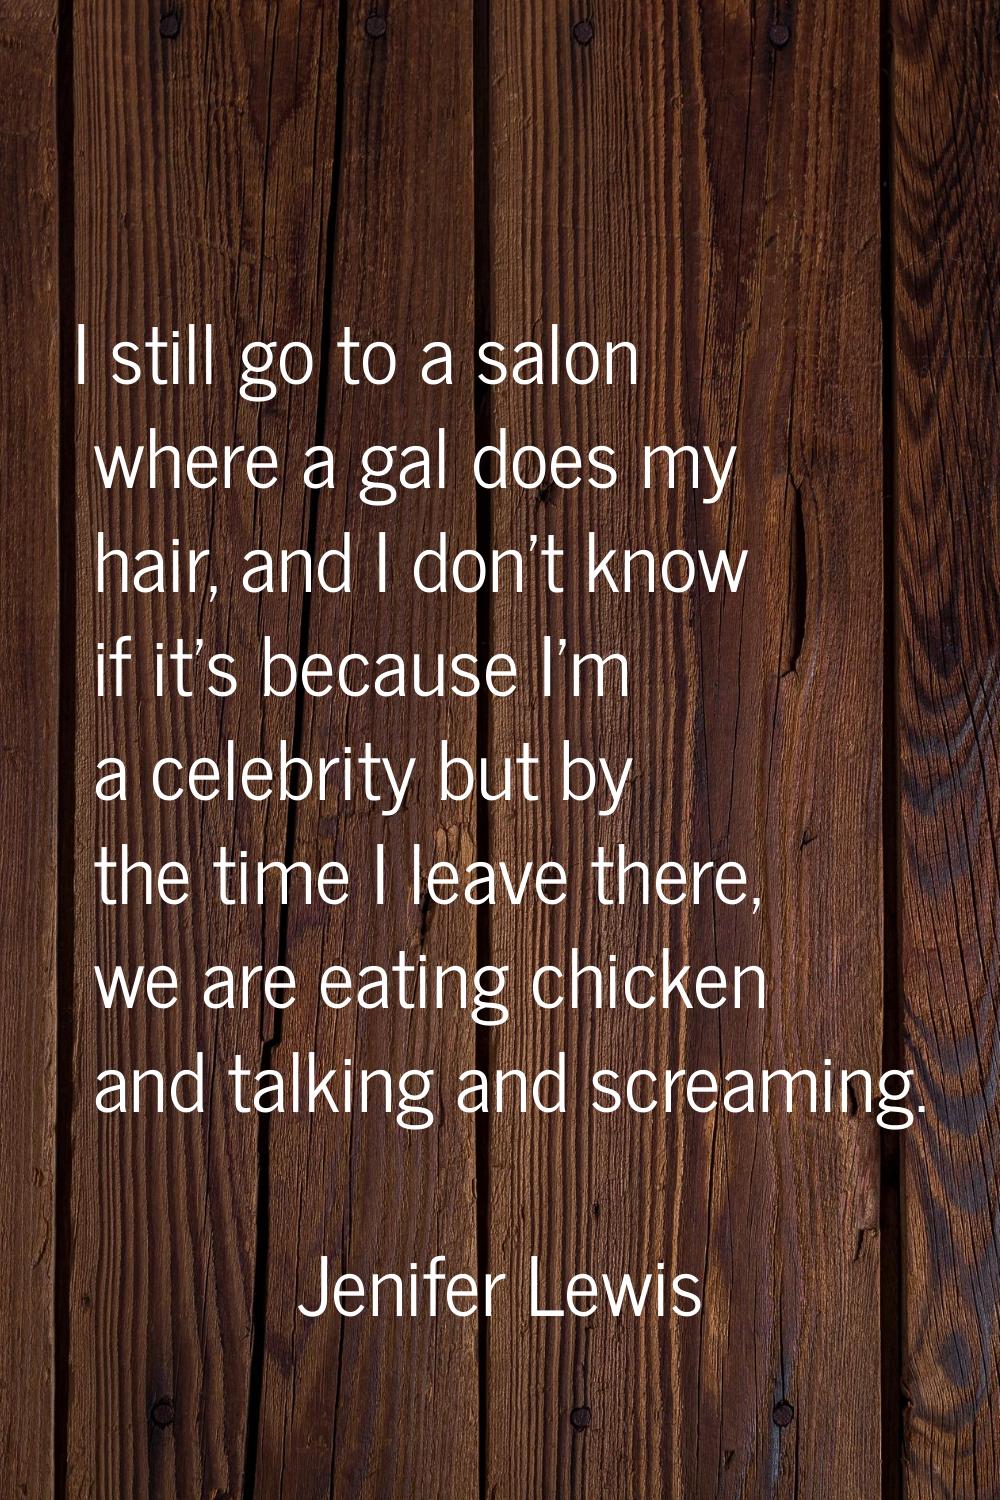 I still go to a salon where a gal does my hair, and I don't know if it's because I'm a celebrity bu